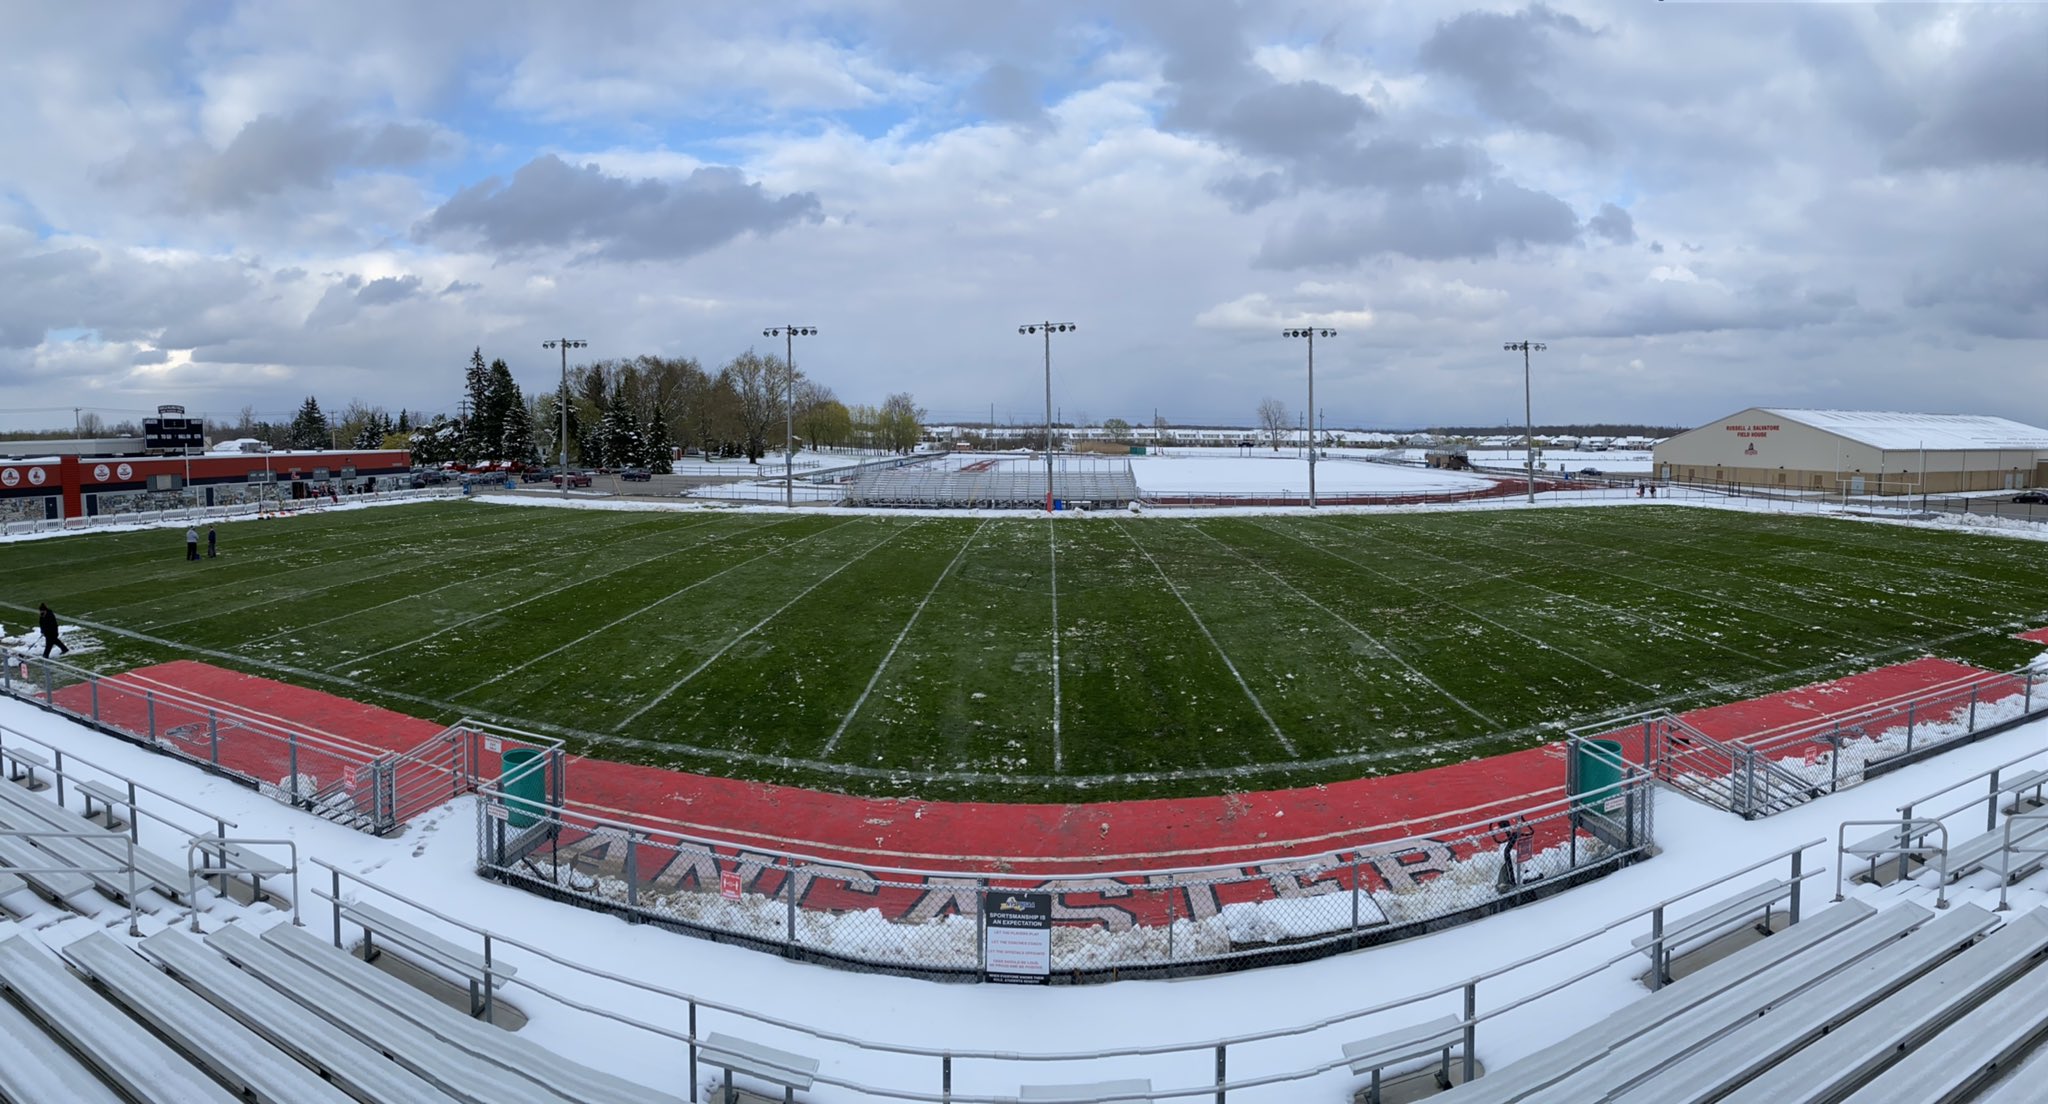 Snow Day at Foyle-Kling Field April 21st 2021